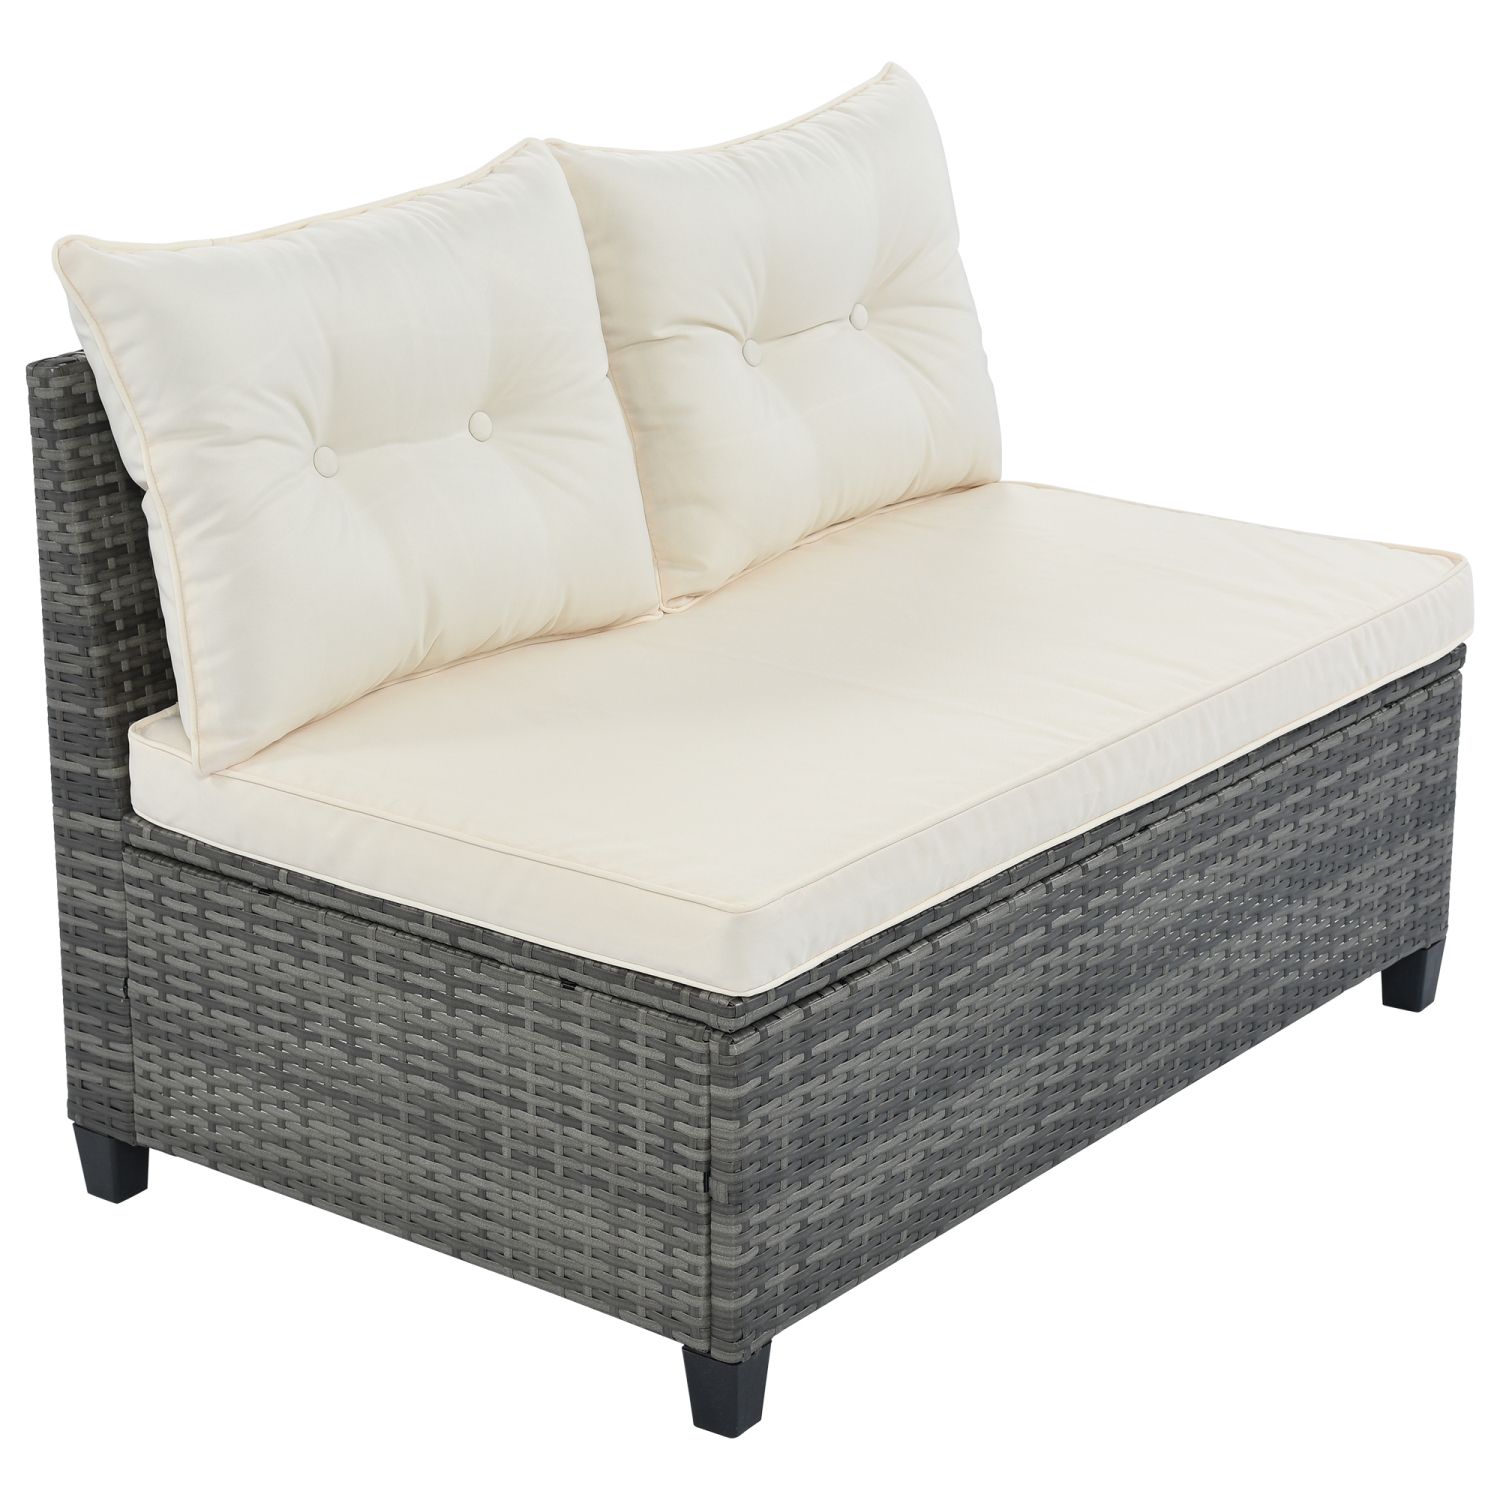 Outdoor at Sectional JASMODER Rattan in Sectionals Cushion(S) with Beige Frame Sofas & department the Patio